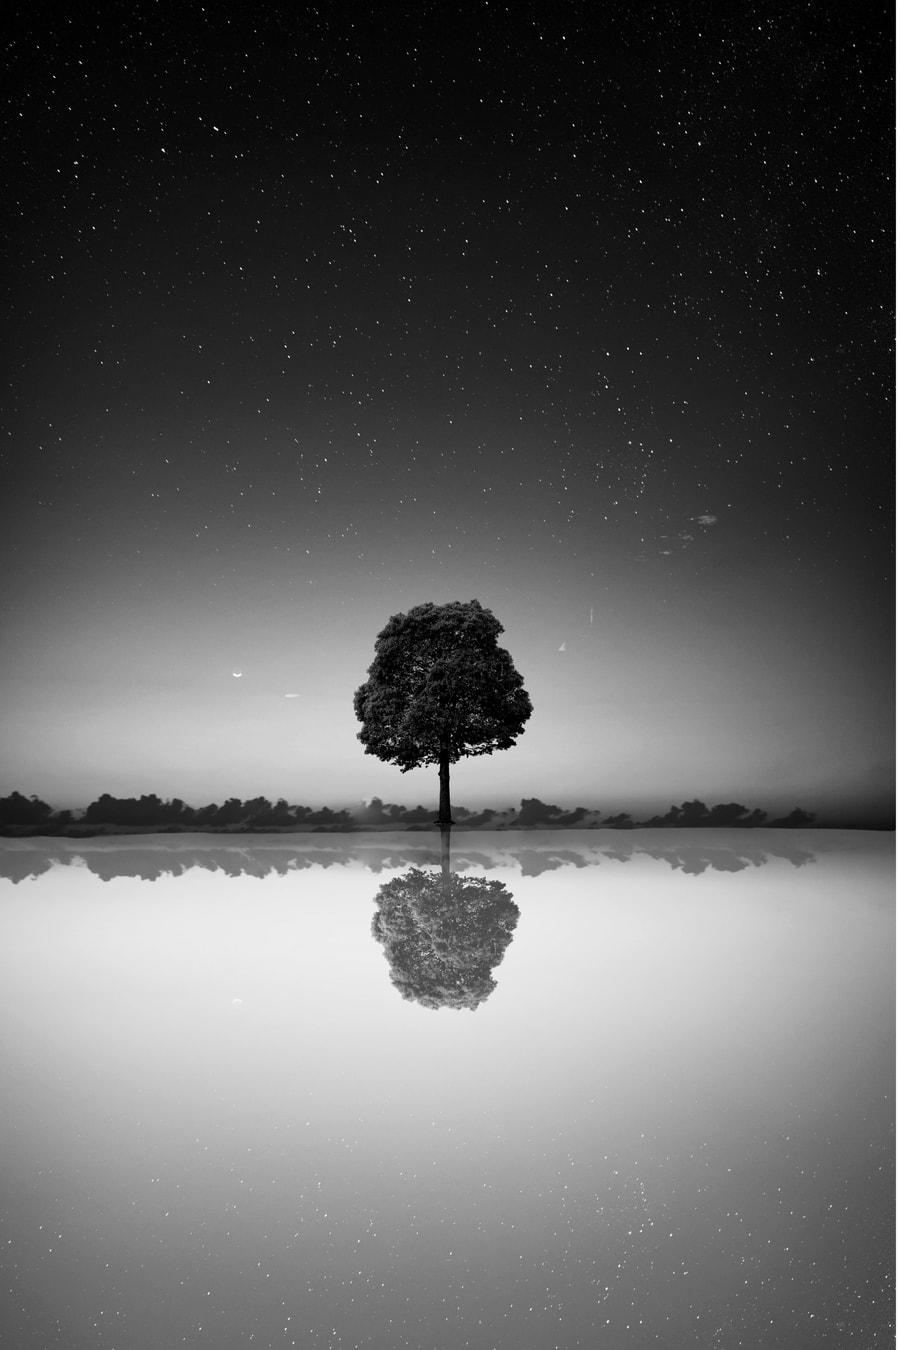 A sole tree in a black-and-white photo, in the middle of a lake, its reflection showing along with the milkyway.